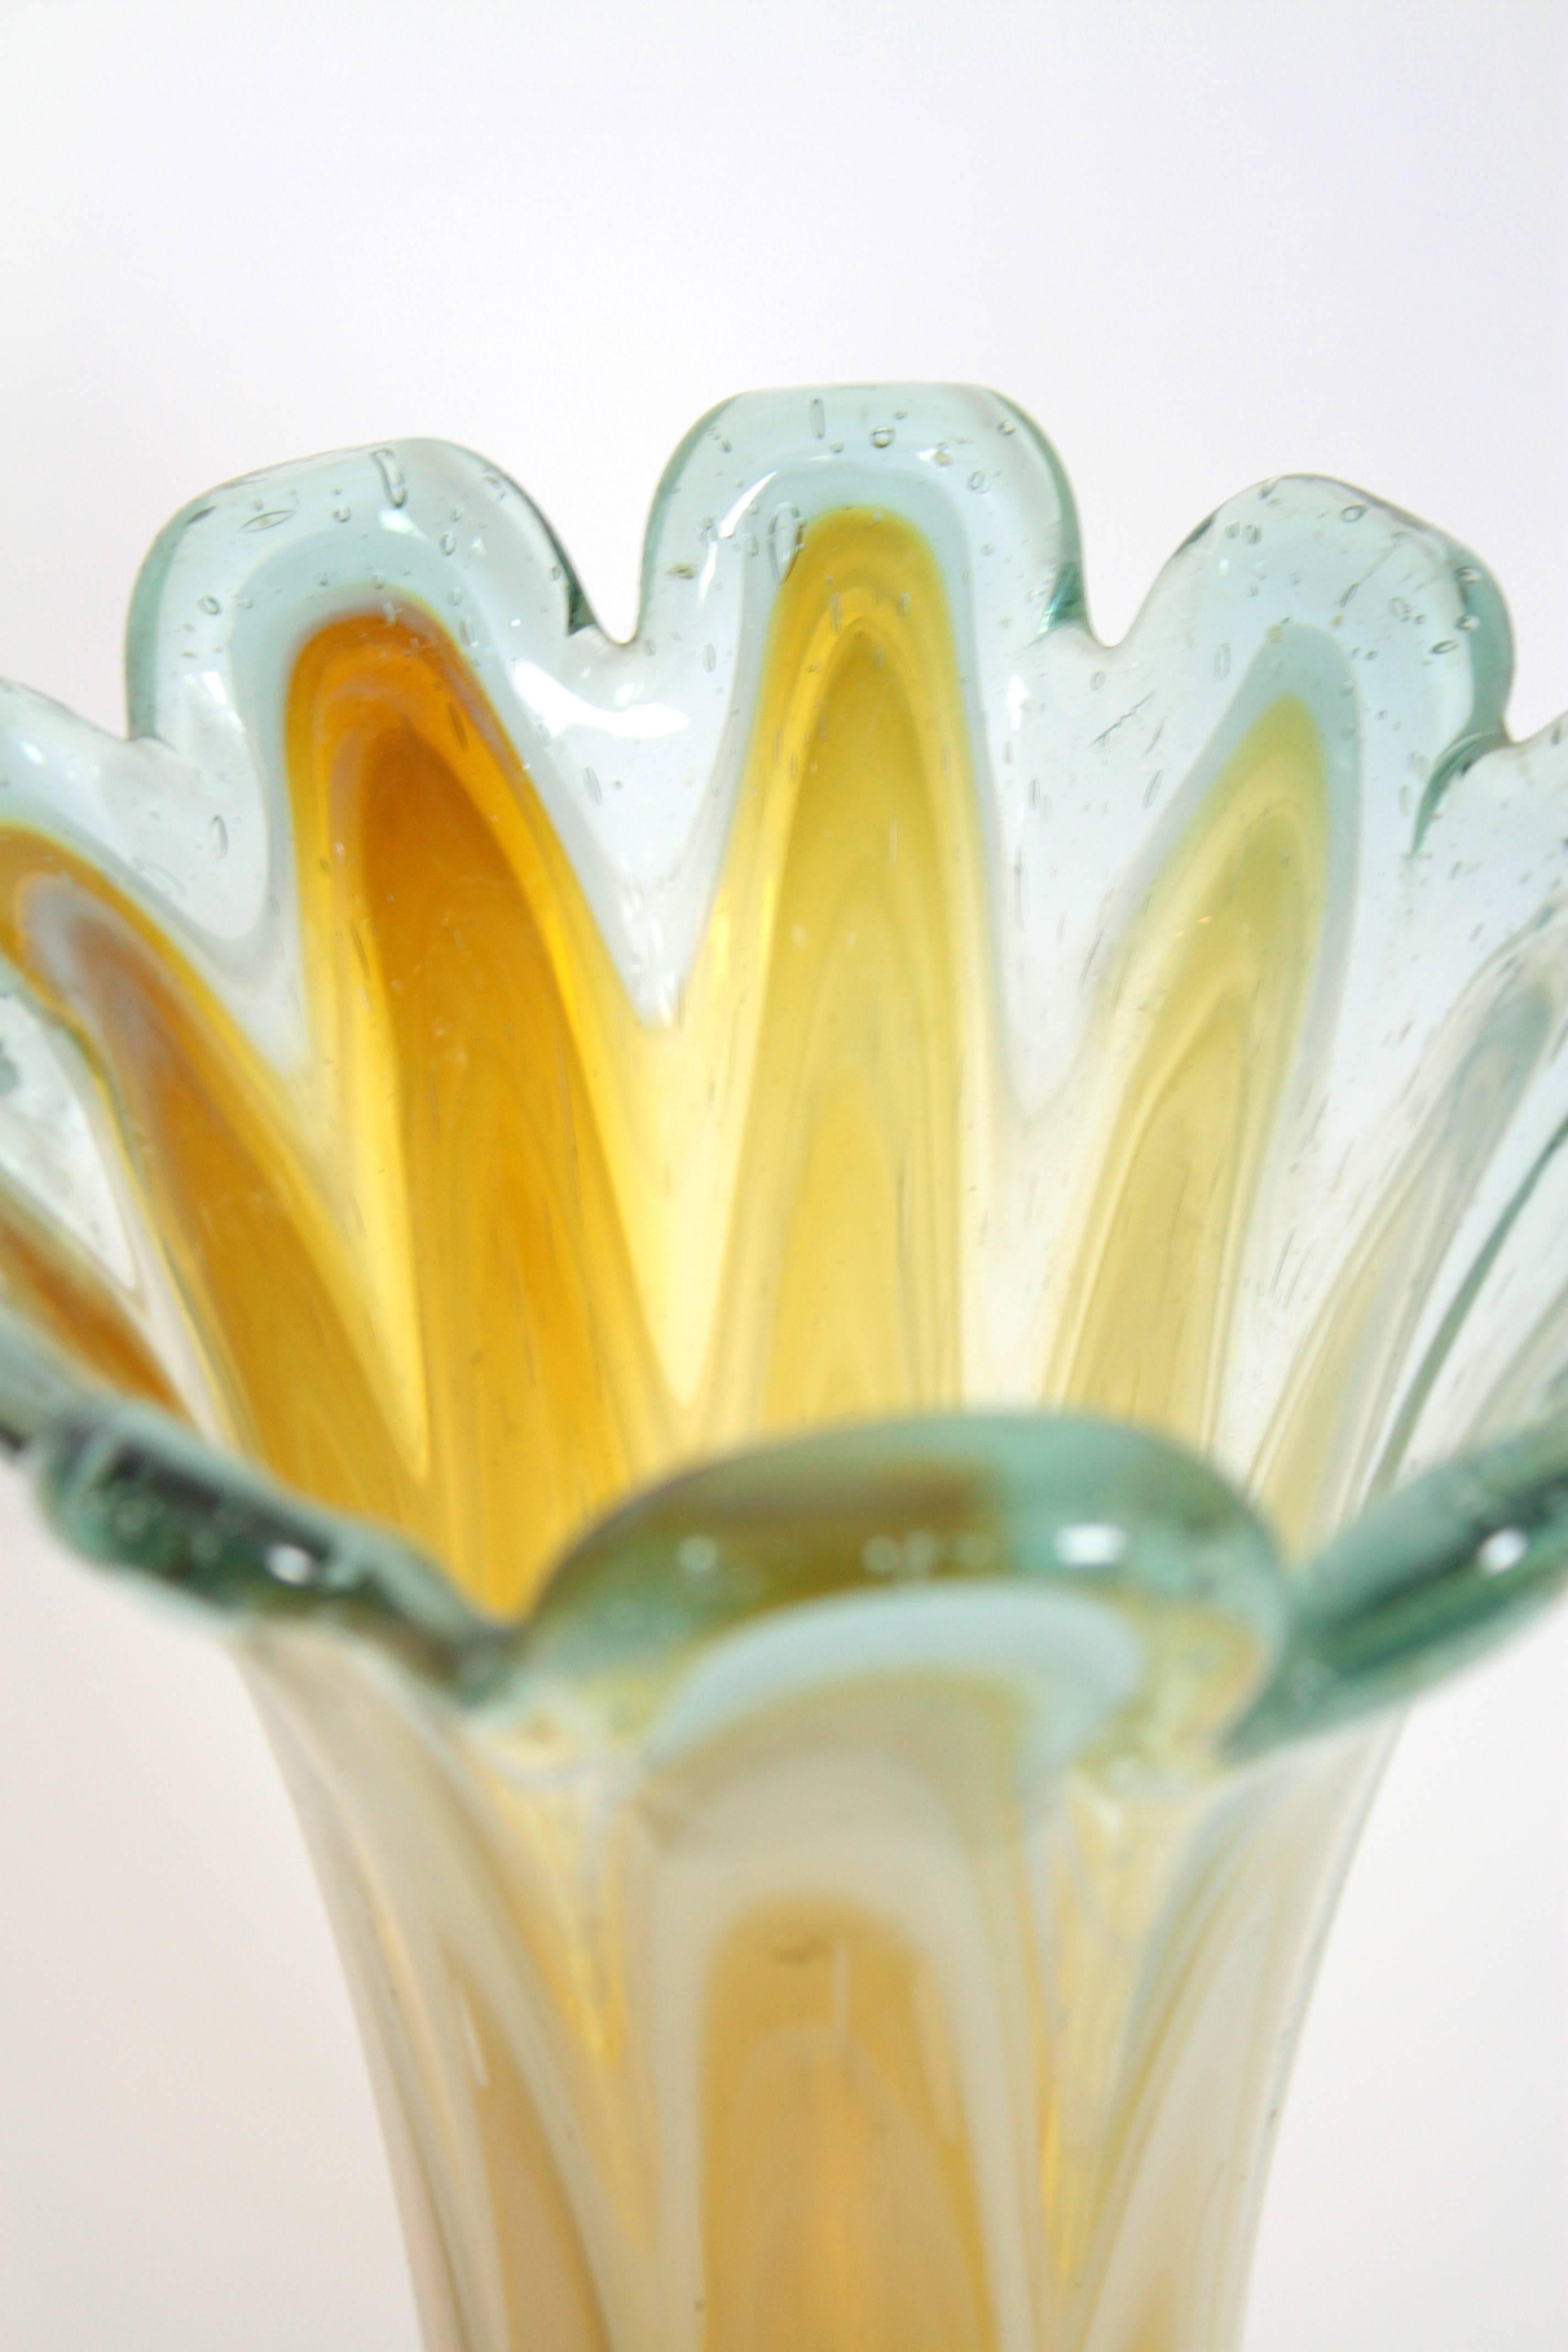 Sculptural handblown Murano glass scalloped vase with ripples (amber, cream and white glass) cased into clear glass. Italy, 1960s.
The vase is in excellent condition. 
Pointil mark underneath.
To be used as flower vase or decorative vase. Perfect as